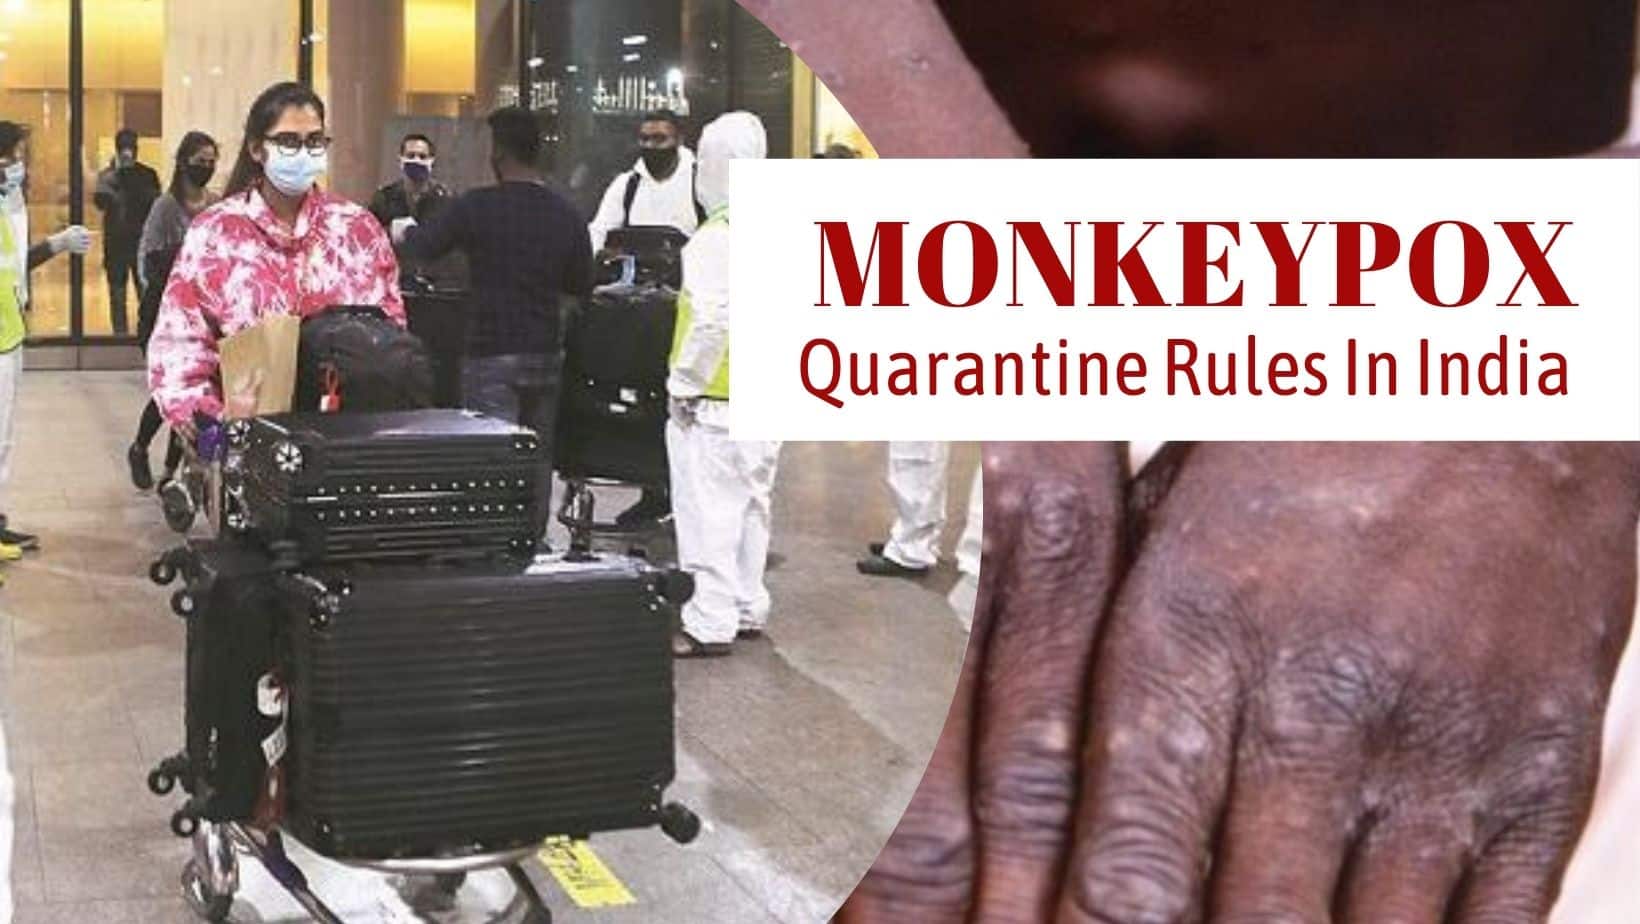 What Happens If You Test Positive For Monkeypox In India? Quarantine Rules And Other Details